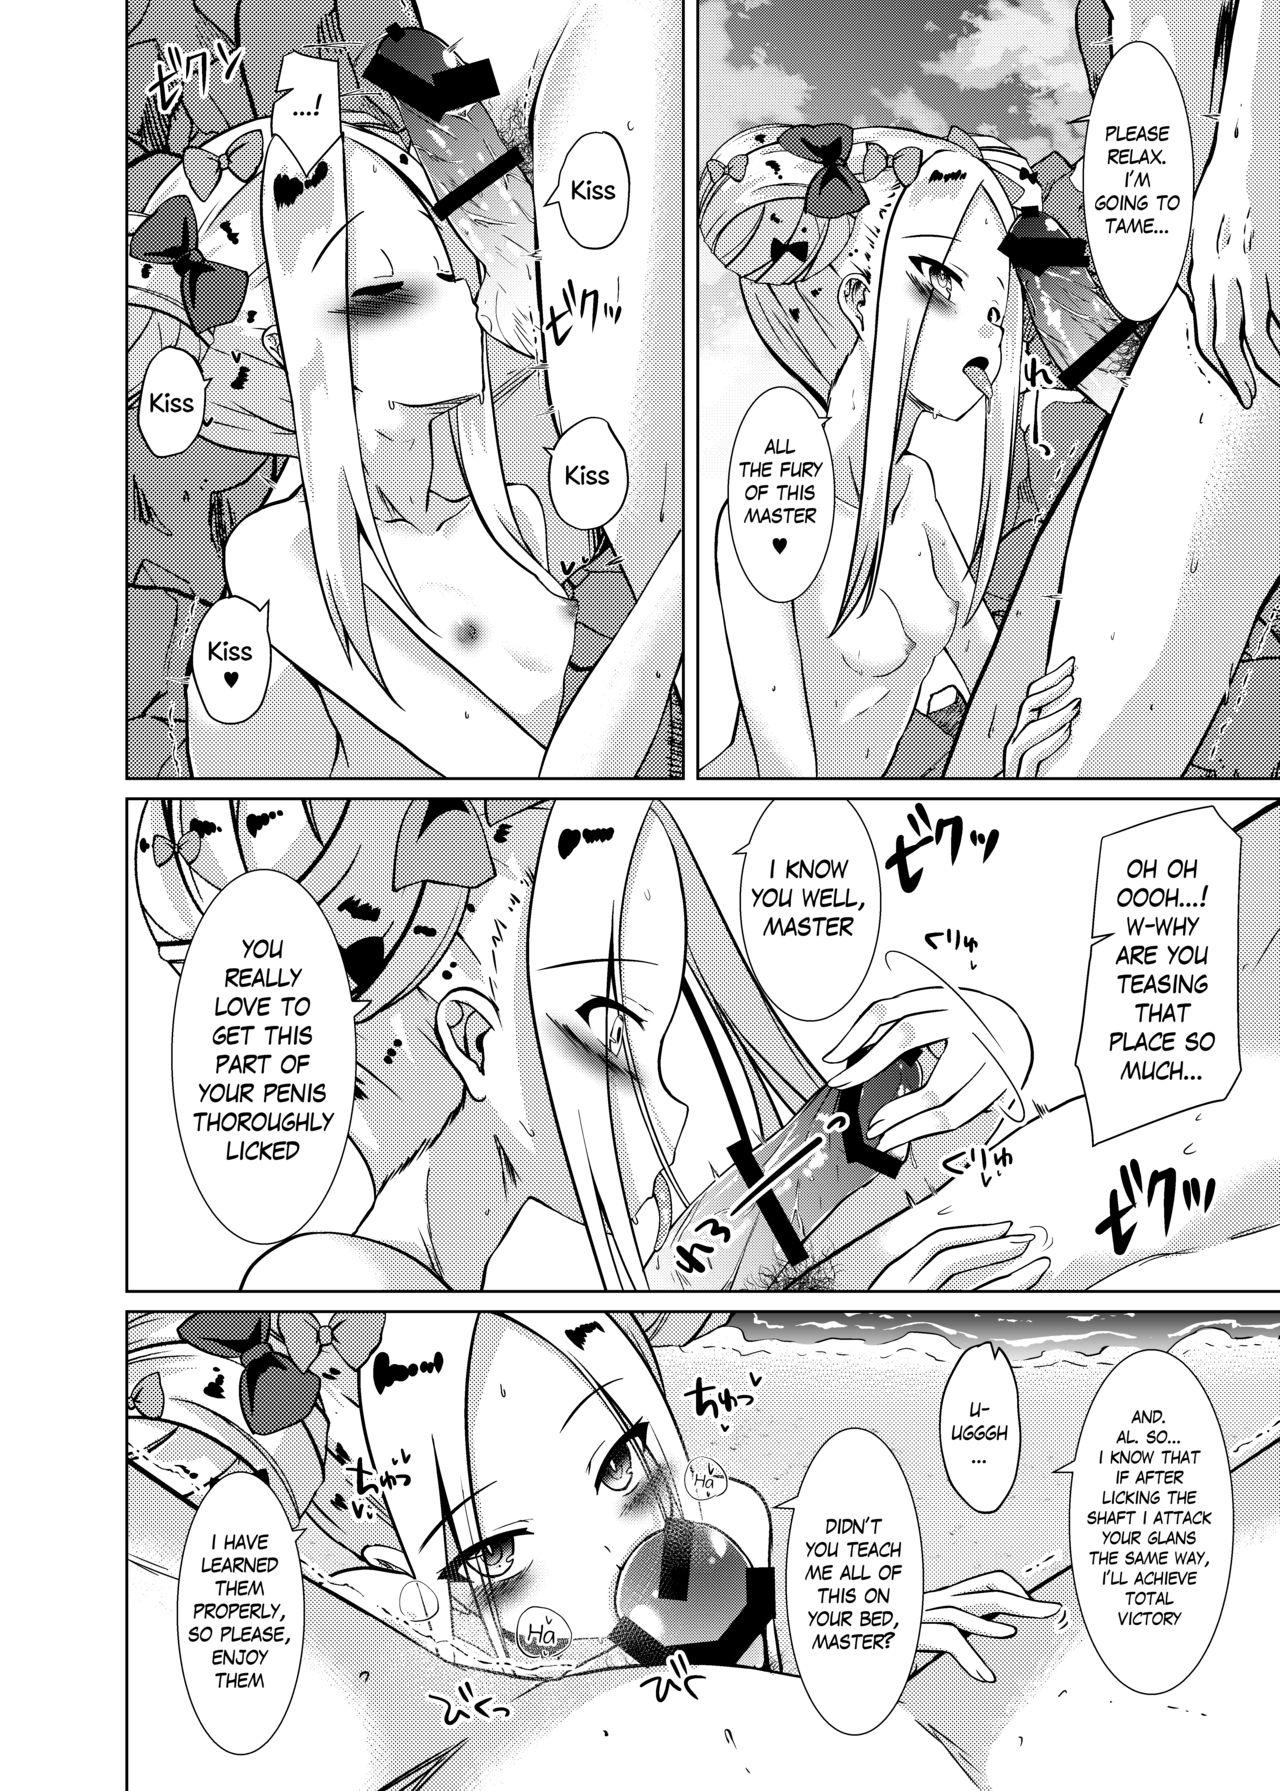 Passionate [Sakura Garden (Shirosuzu)] Chaldea Outdoor Challenge Abby-chan to Issho 2 | Chaldea Outdoor Challenge with Abby-chan 2 (Fate/Grand Order) [English] [The Blavatsky Project] [Digital] - Fate grand order Fodendo - Page 7